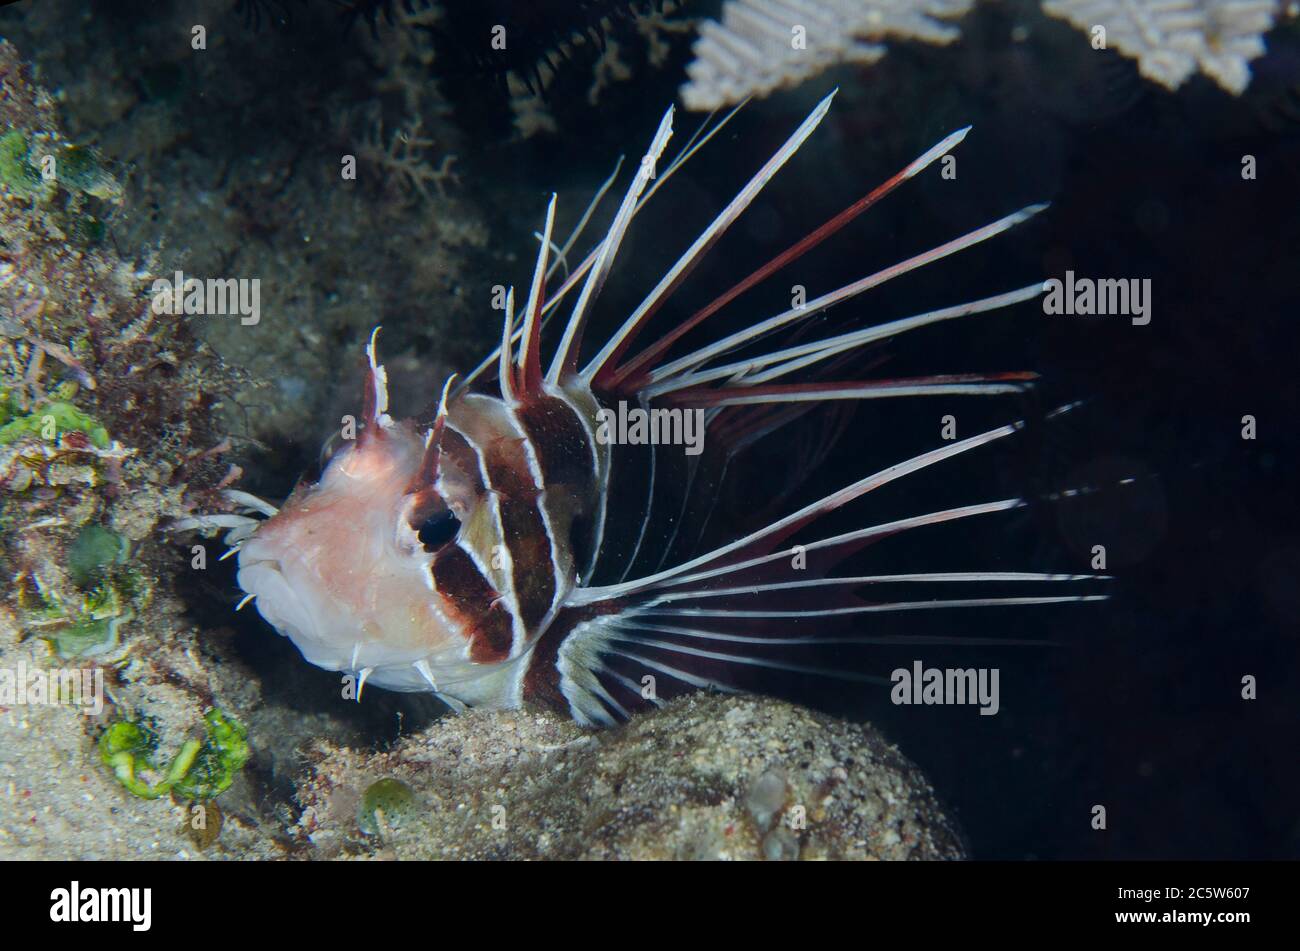 Clearfin Lionfish, Pterois radiata, night dive, Murex House Reef dive site, Bangka Island, north Sulawesi, Indonesia, Pacific Ocean Stock Photo